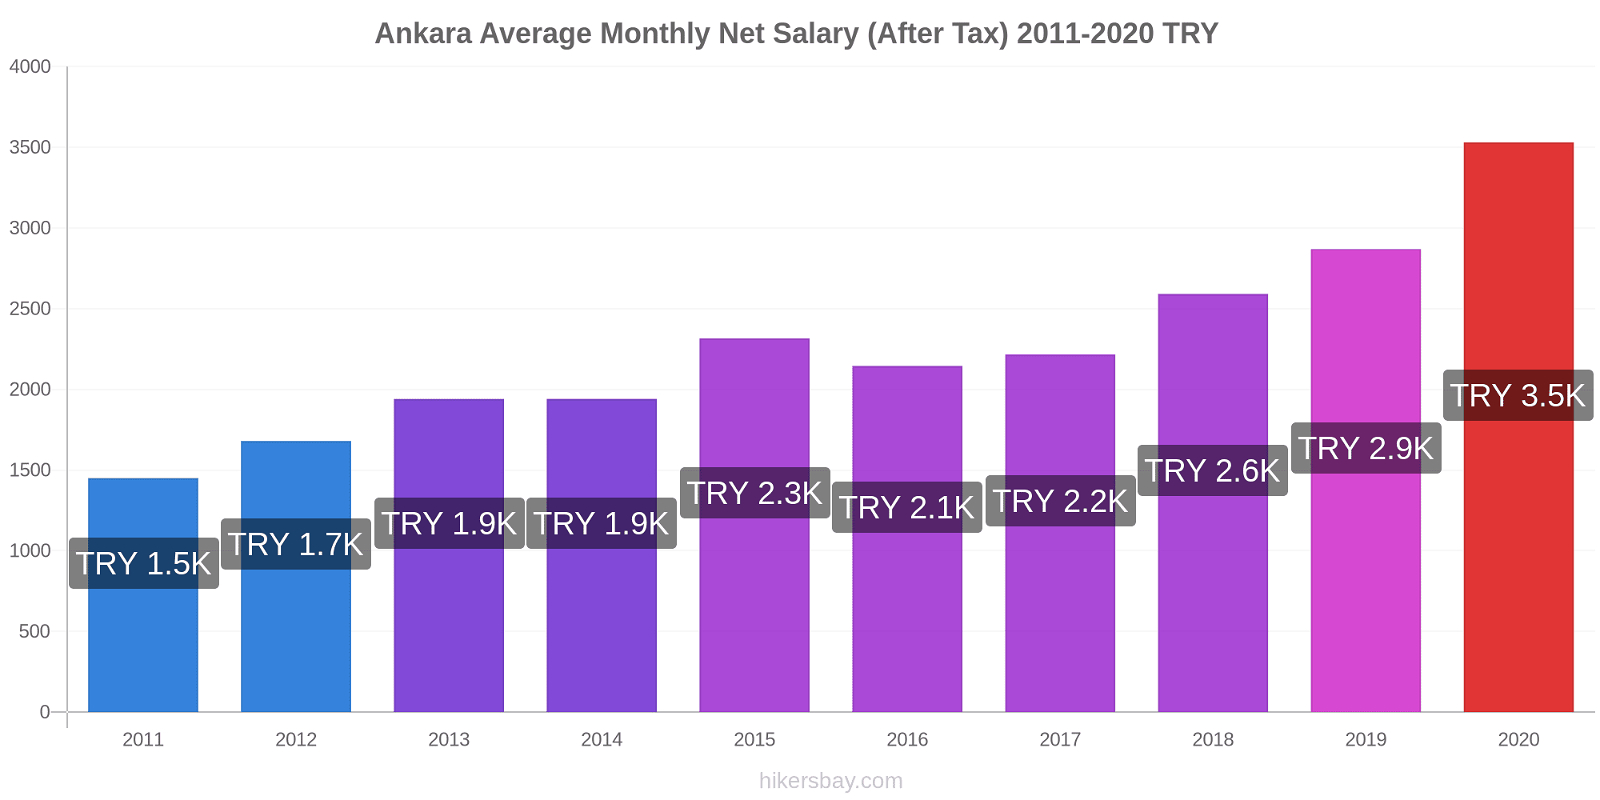 Ankara price changes Average Monthly Net Salary (After Tax) hikersbay.com